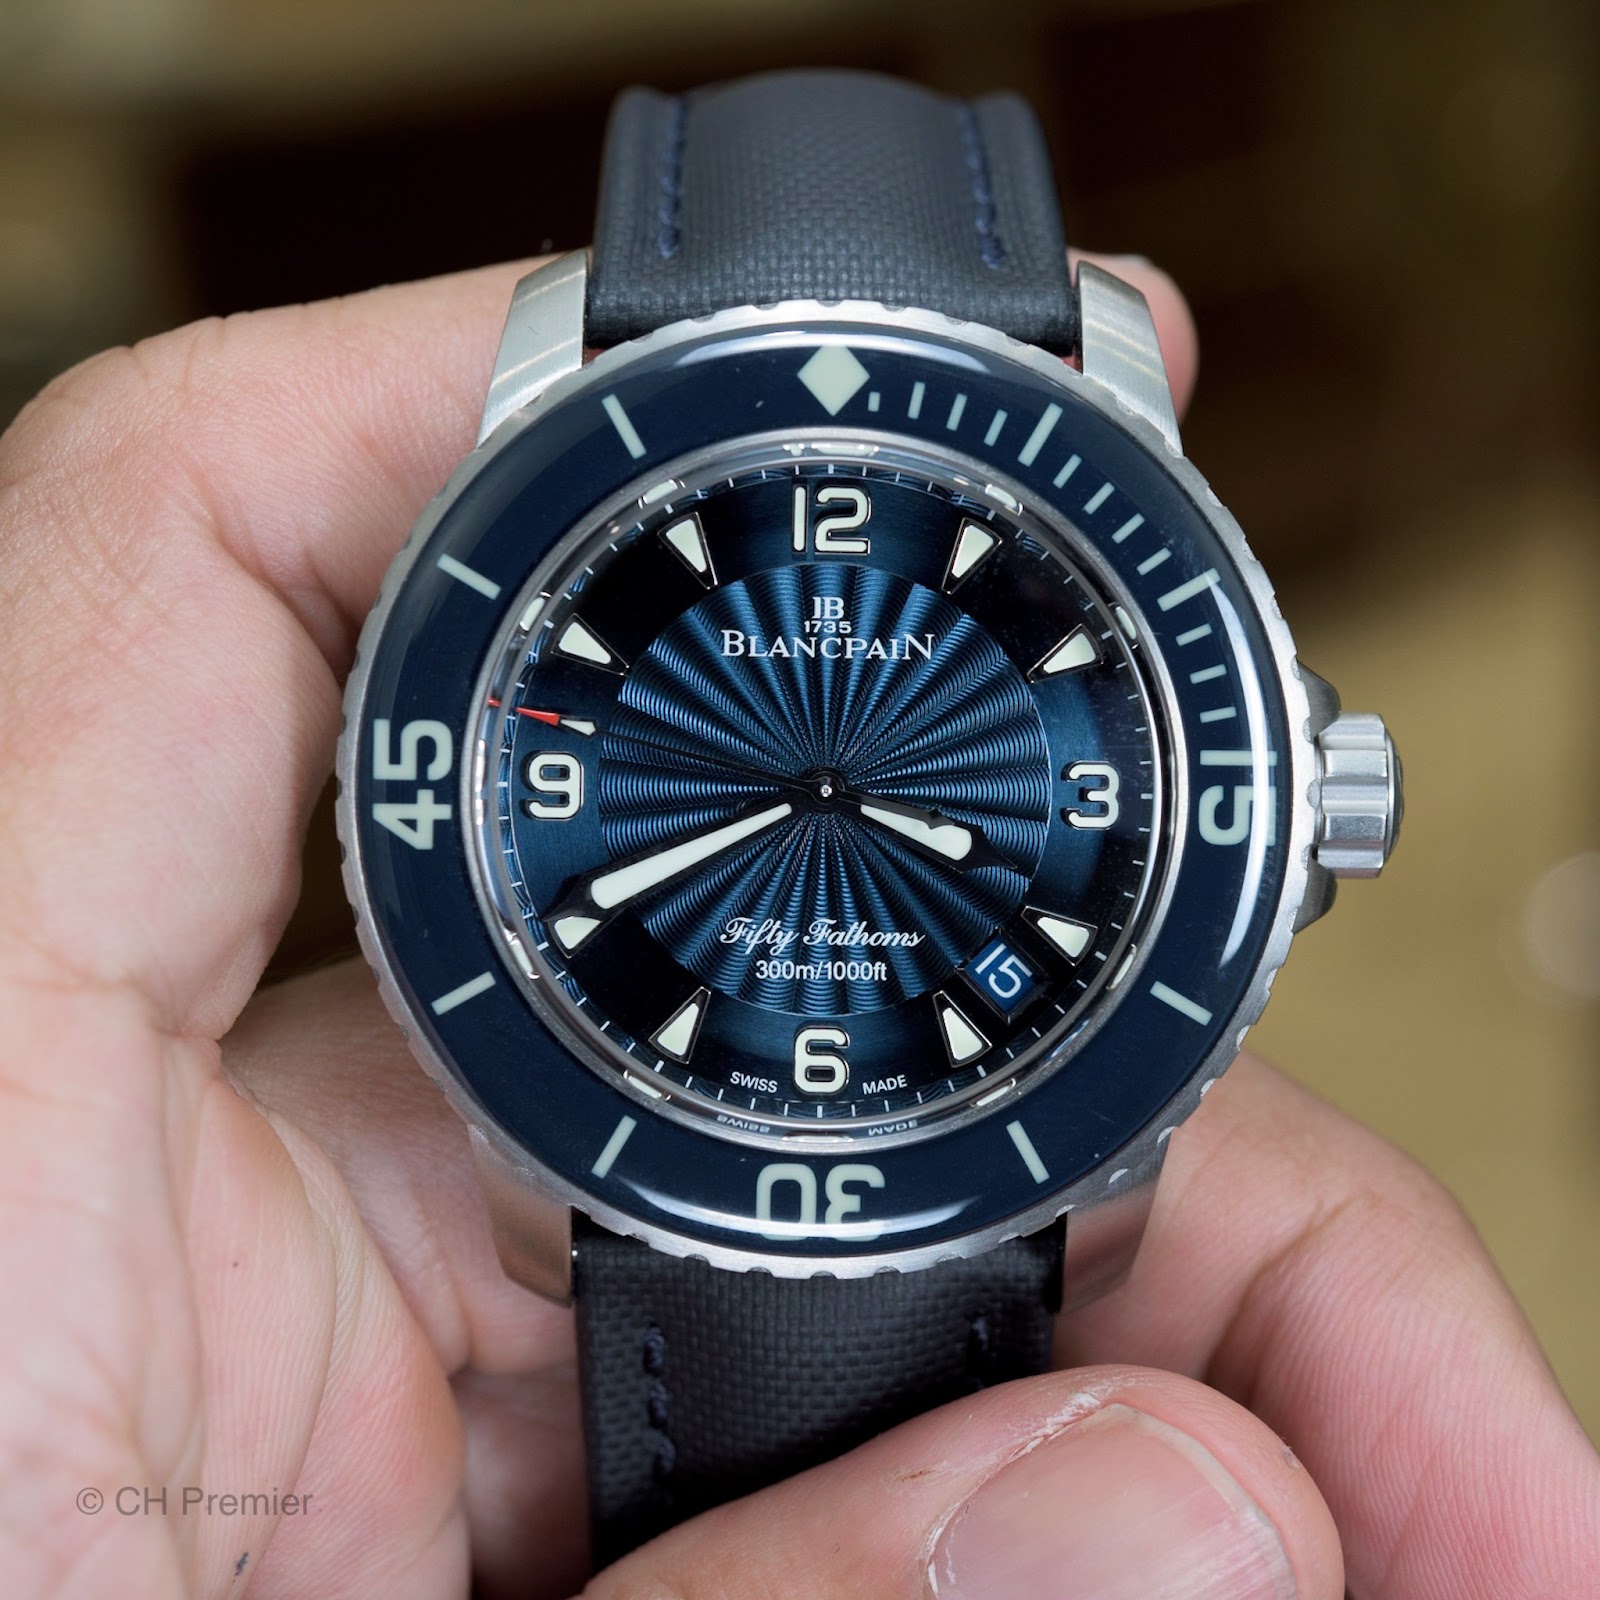 Blancpain’s Fifty Fathoms: The Original Dive Watch